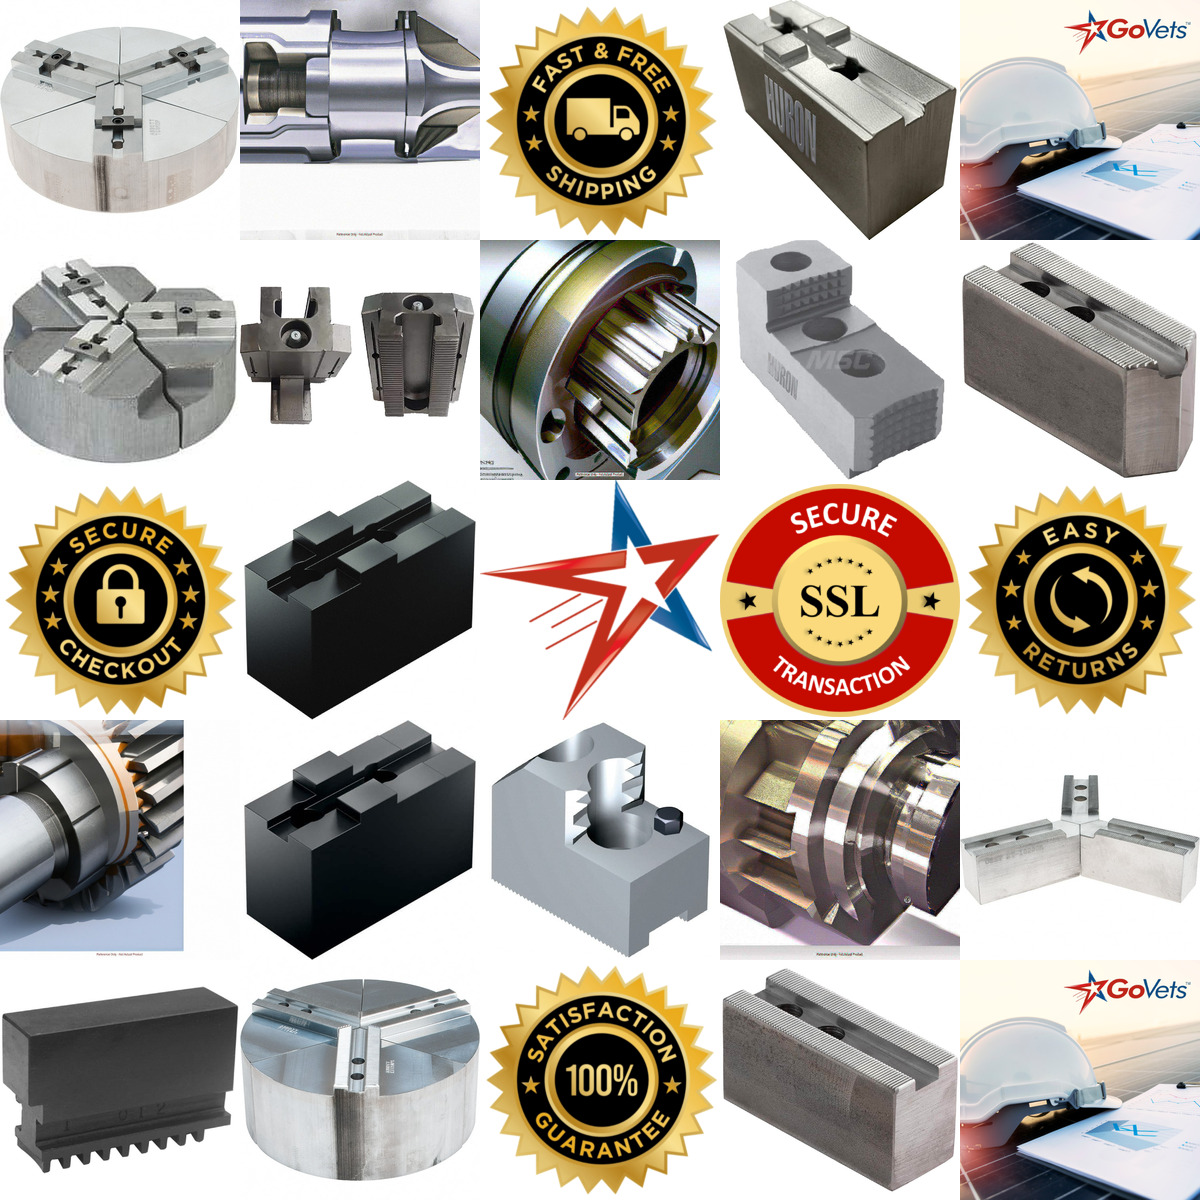 A selection of Lathe Chuck Jaws products on GoVets